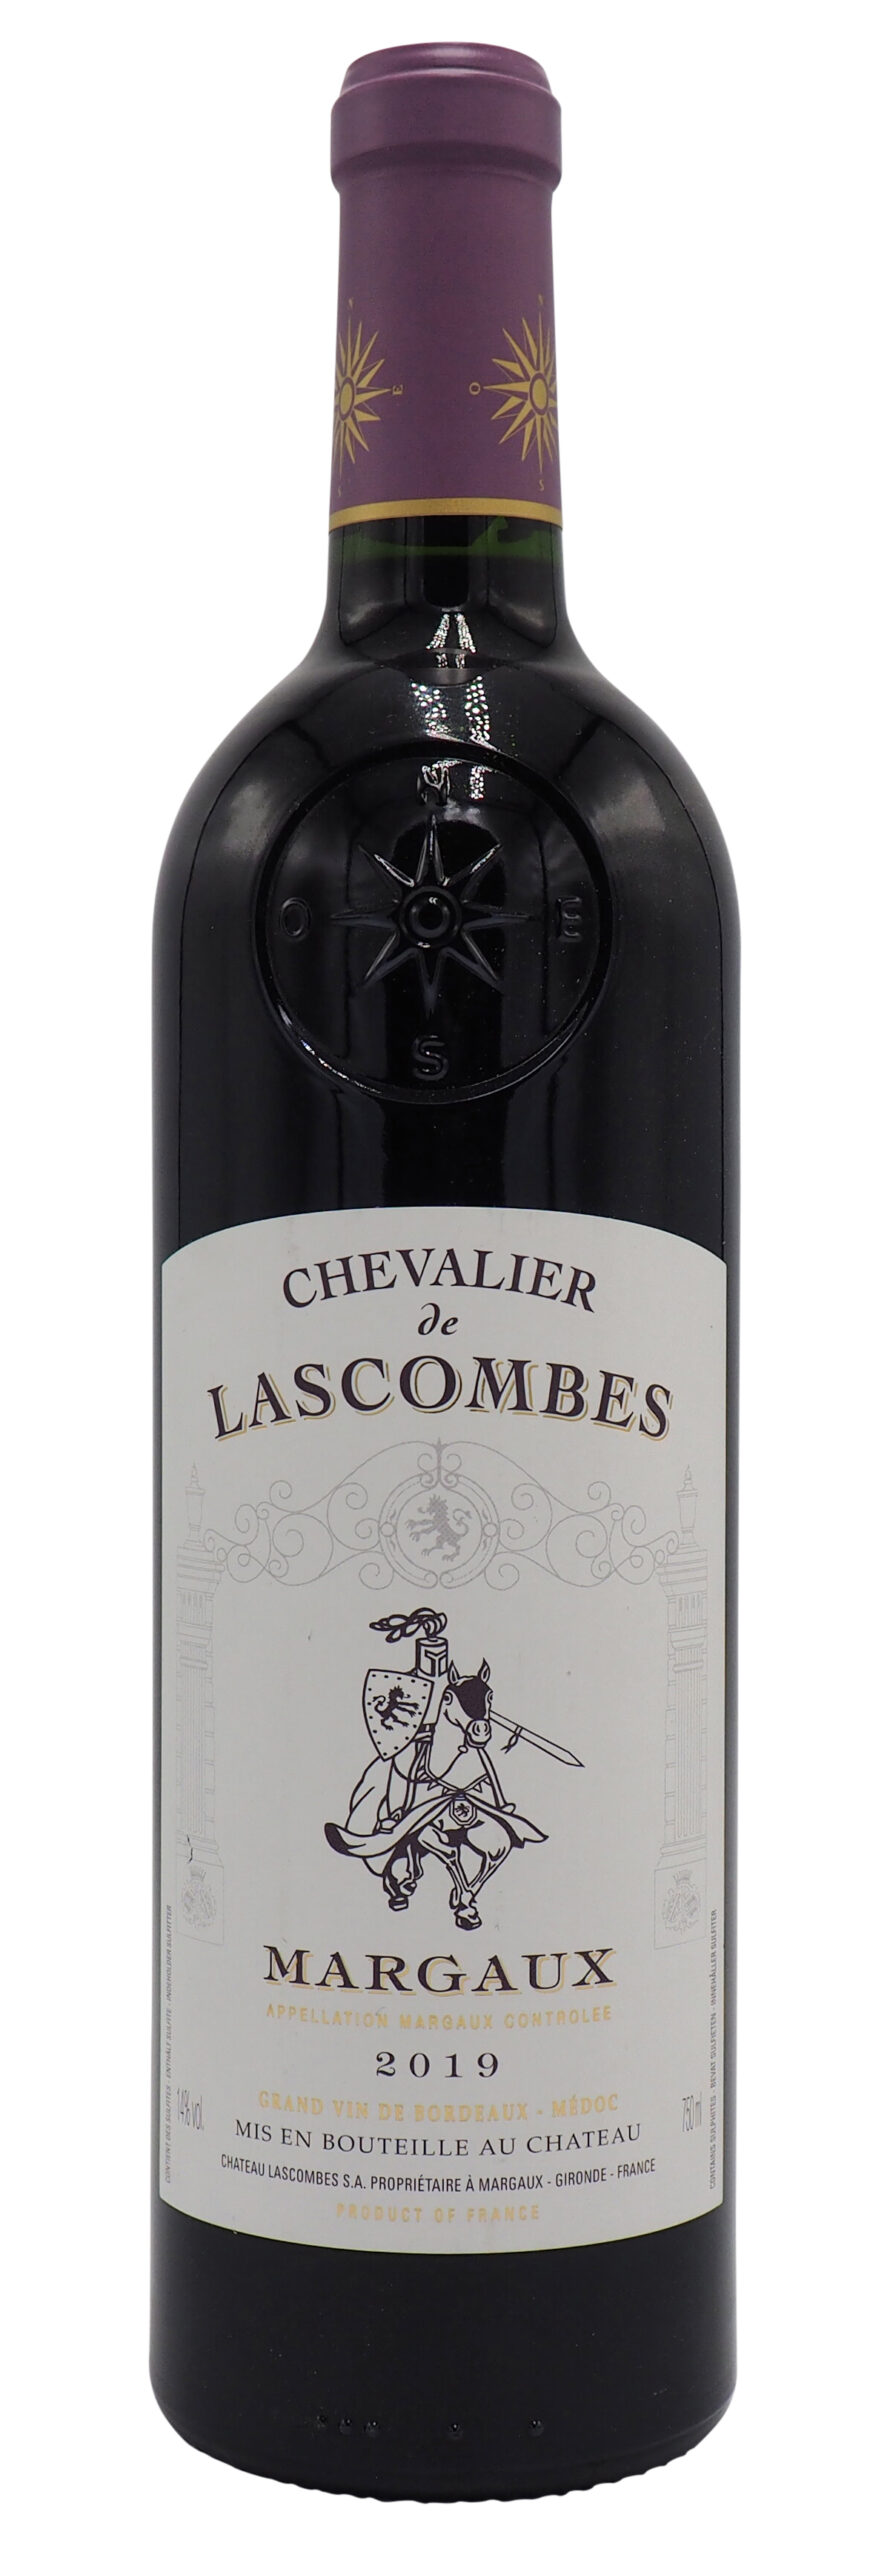 Chevalier Lascombes Margaux 2019